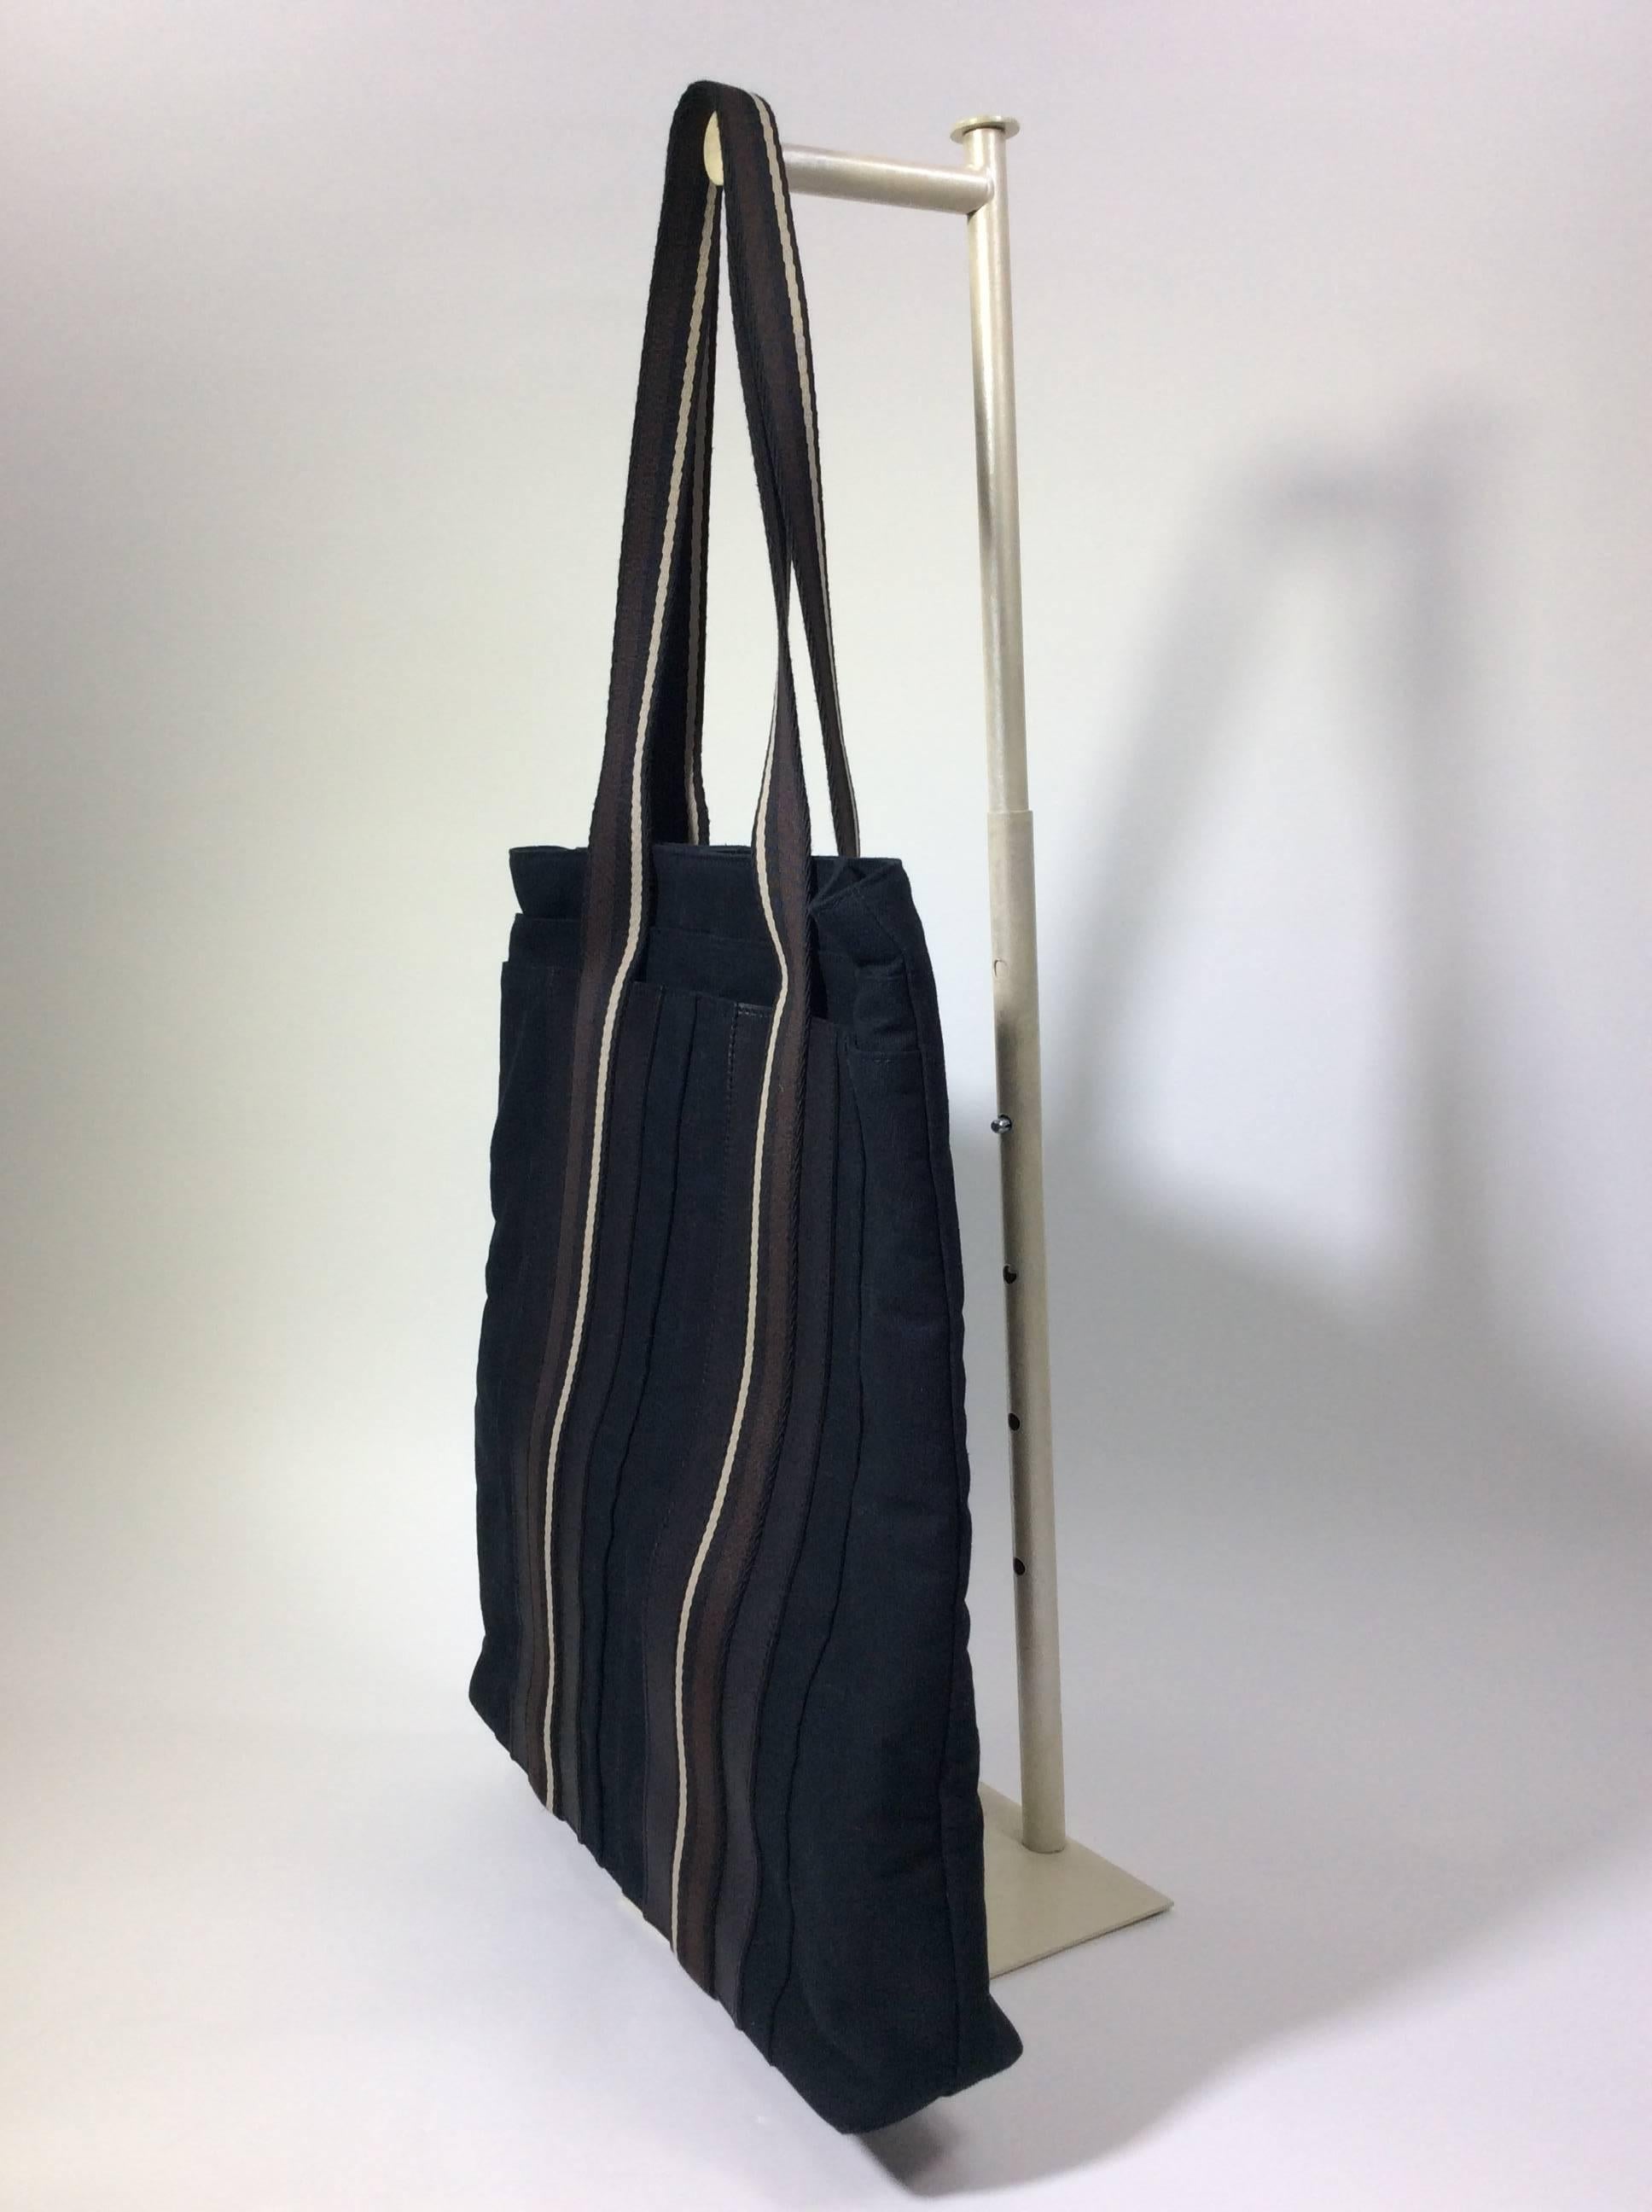 Hermes Black Tote with Leather Detail
Brown and Tan Stripped Handles
Two Large Exterior Pockets
Black Interior with Large Pocket
Handle Strap Drop 12